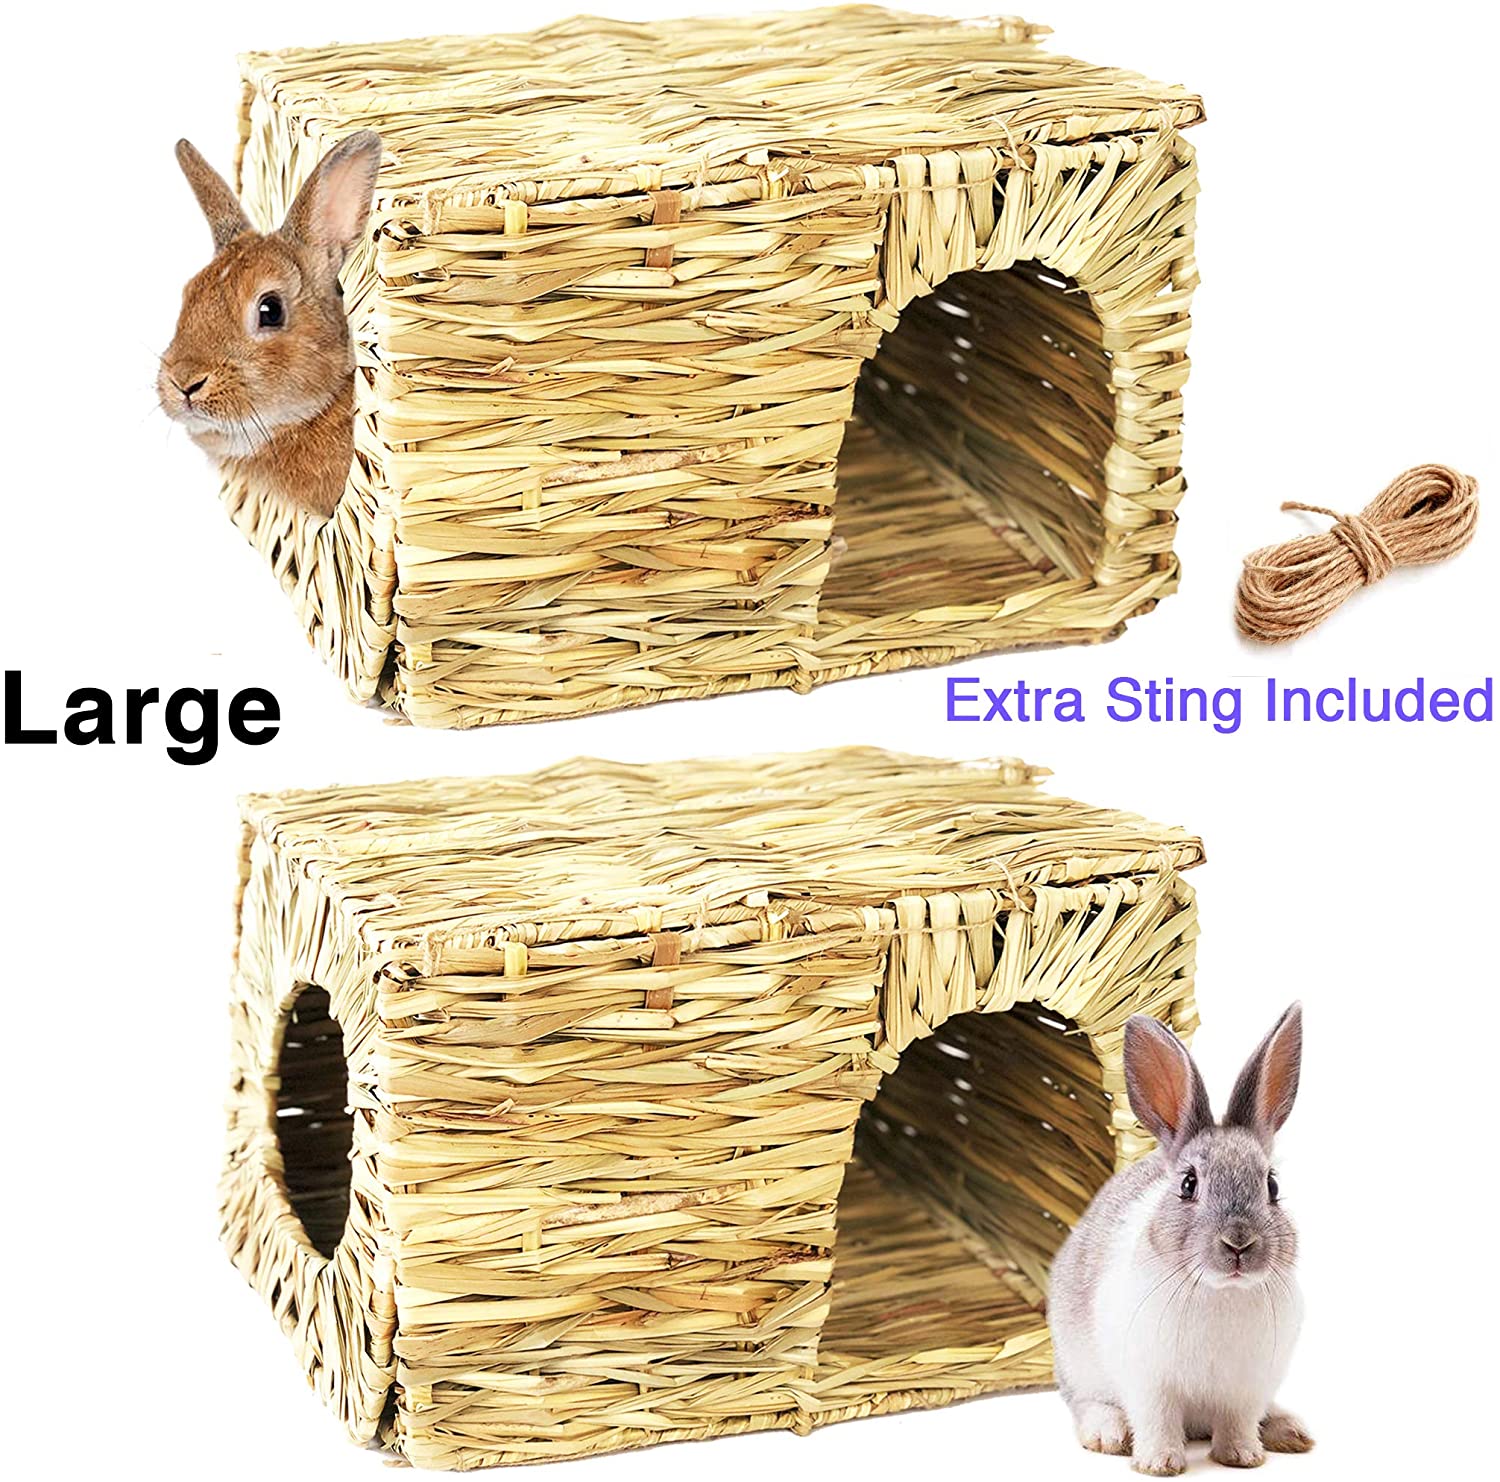 Tfwadmx Rabbit Grass House,Natural Hand Woven Seagrass Play Hay Bed Tunnel Bunny Hideaway Hut Toy for Gerbil Guinea Pig Chinchilla Ferret Rat 3 Balls+Bed 